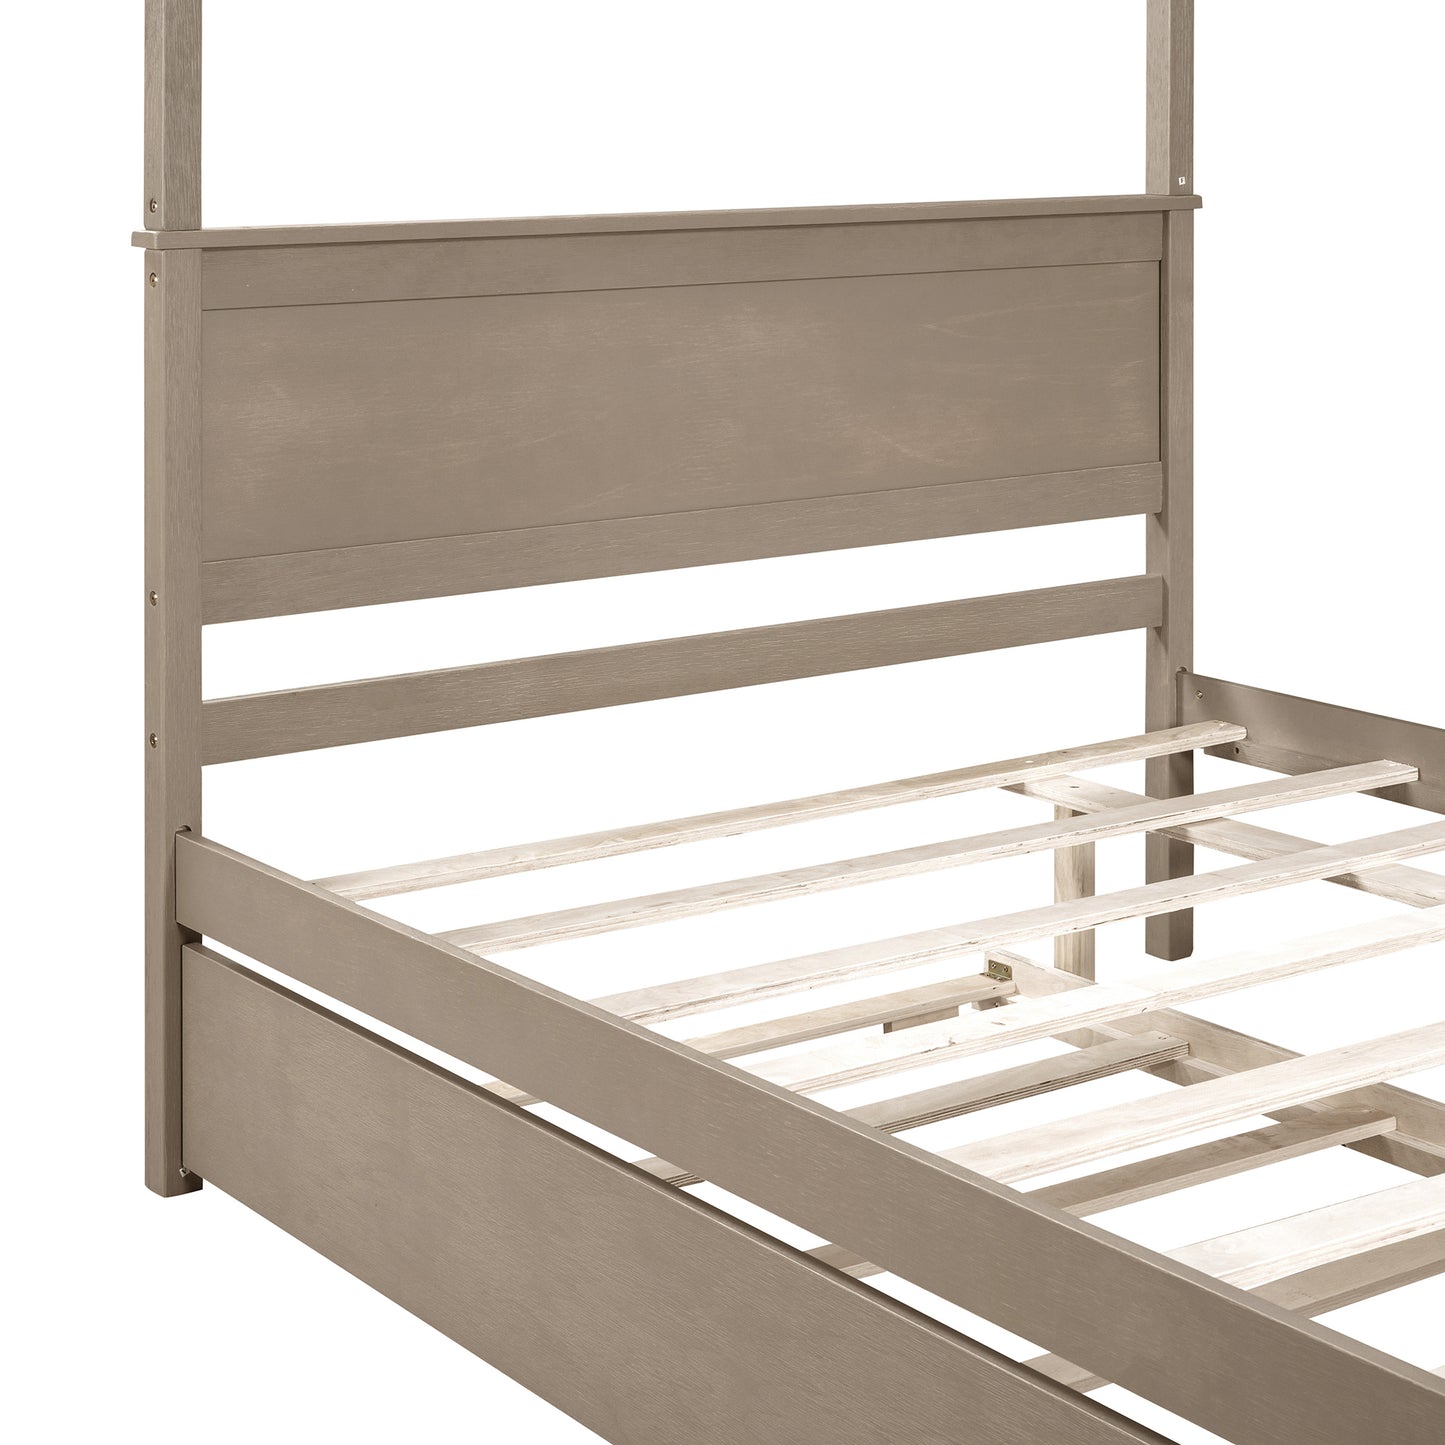 Wood Canopy Bed with Trundle Bed ,Full Size Canopy Platform bed With  Support Slats .No Box Spring Needed, Brushed  Light Brown